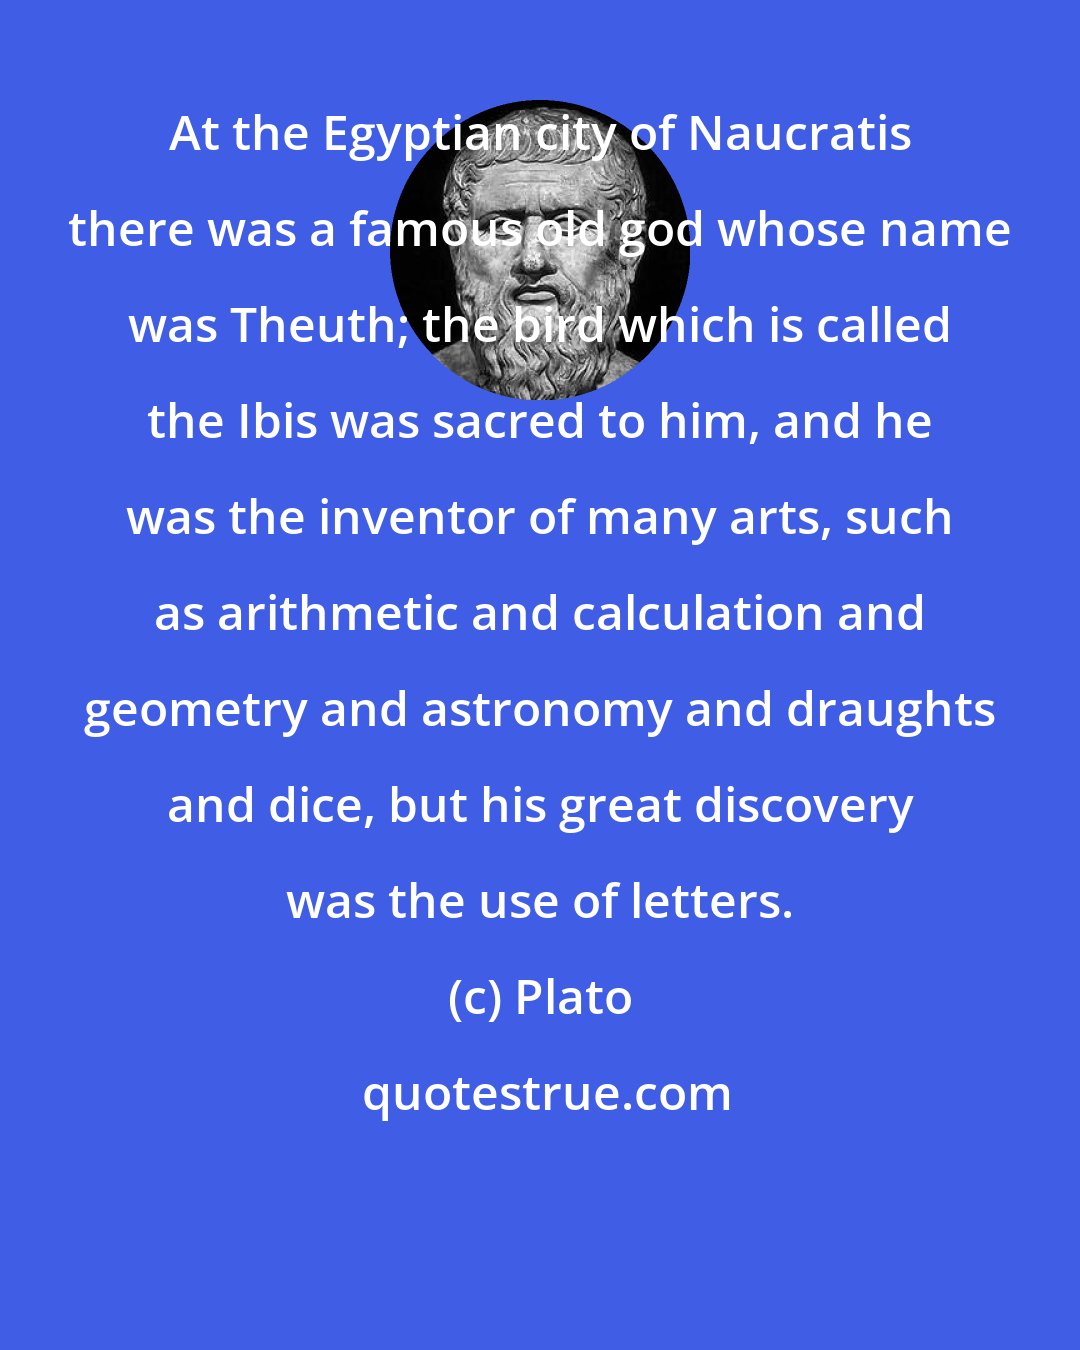 Plato: At the Egyptian city of Naucratis there was a famous old god whose name was Theuth; the bird which is called the Ibis was sacred to him, and he was the inventor of many arts, such as arithmetic and calculation and geometry and astronomy and draughts and dice, but his great discovery was the use of letters.